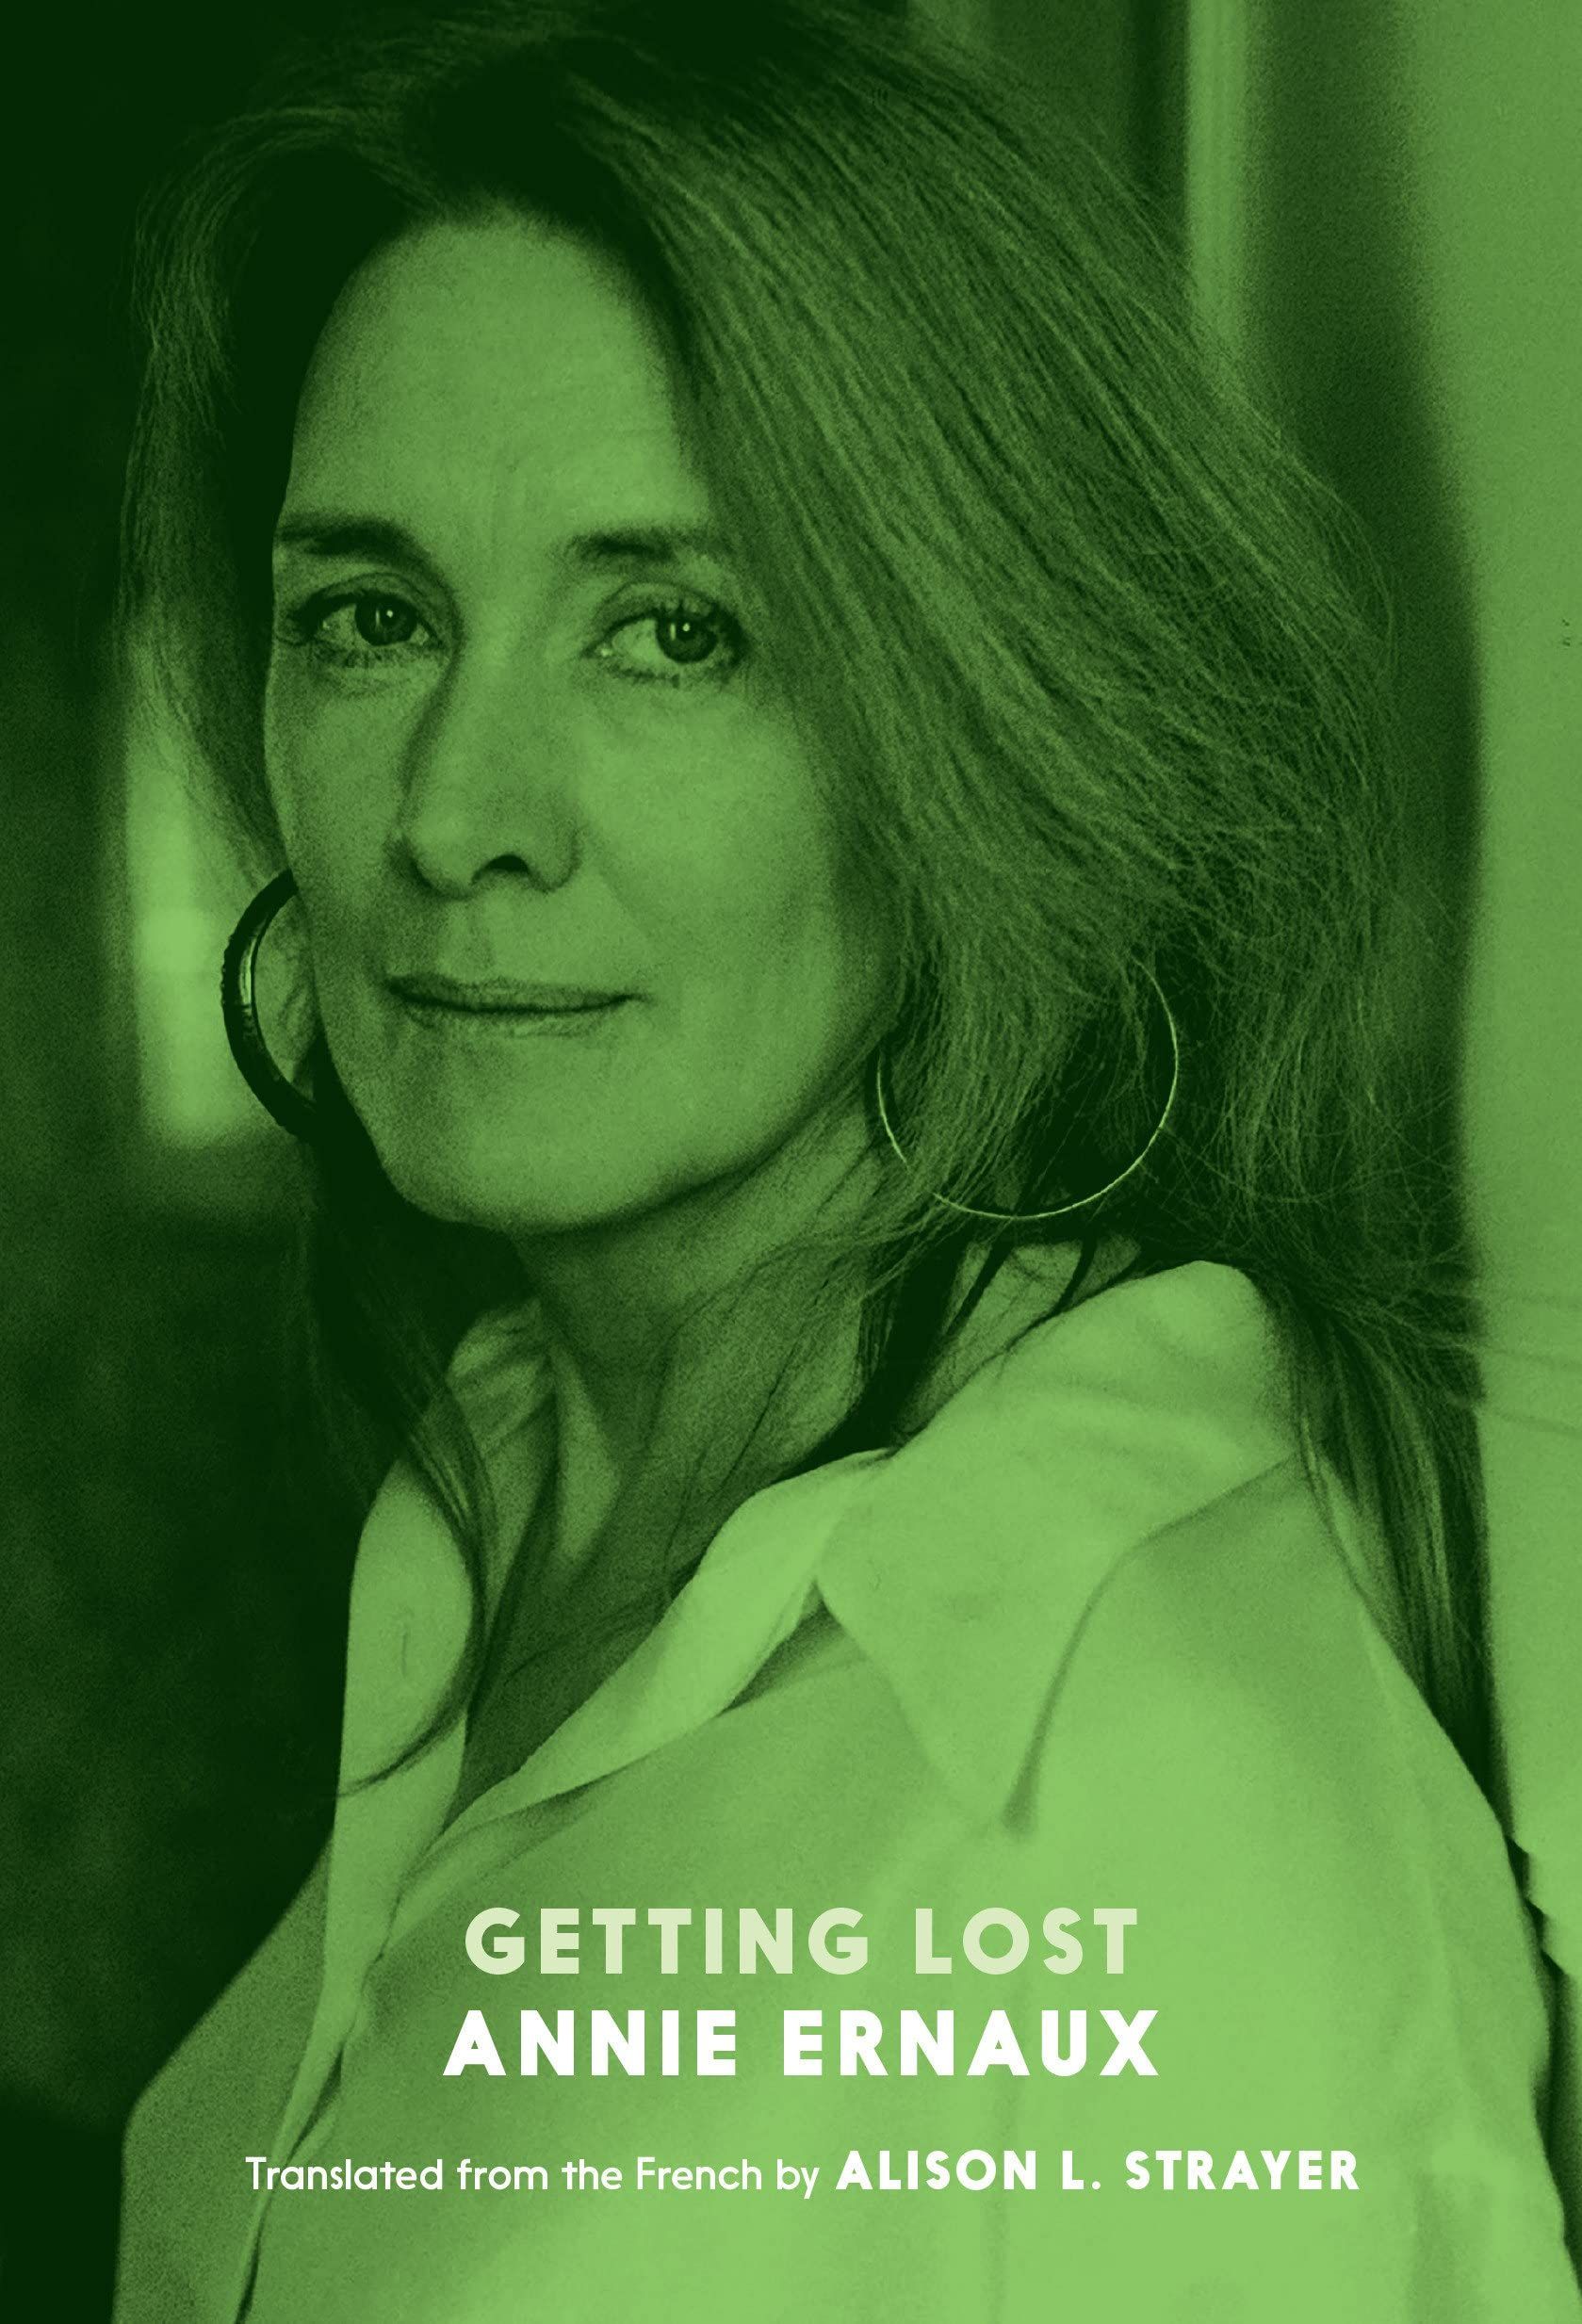 All That Really Happens Happens to Me: On Annie Ernaux’s “Getting Lost”